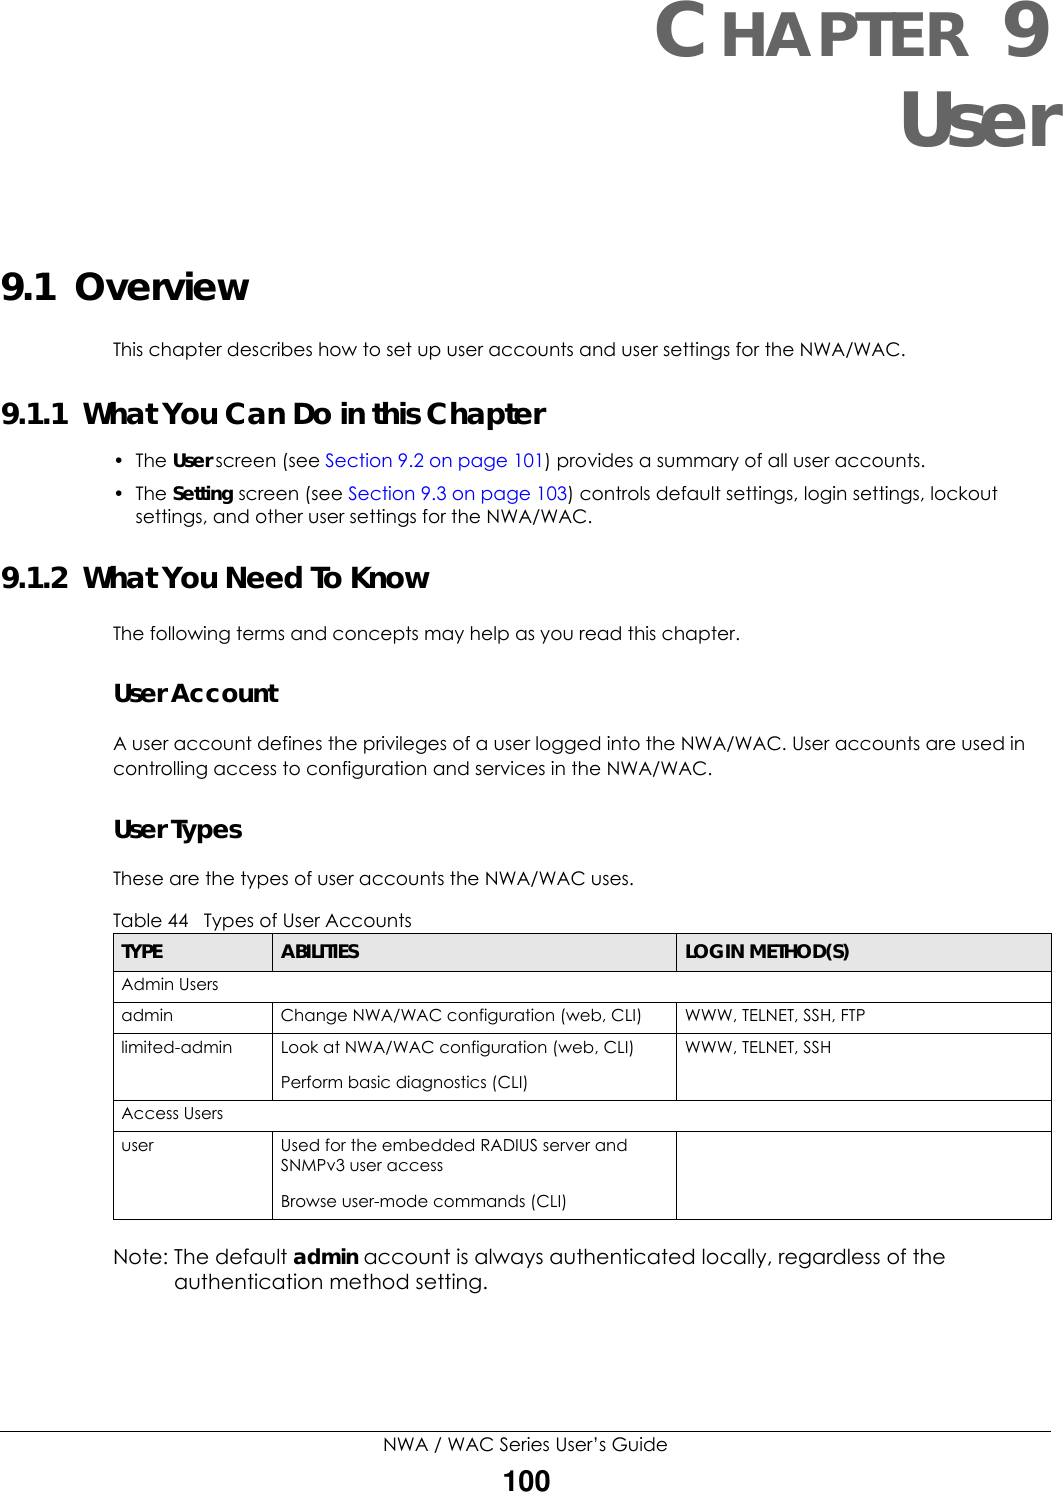 NWA / WAC Series User’s Guide100CHAPTER 9User9.1  OverviewThis chapter describes how to set up user accounts and user settings for the NWA/WAC. 9.1.1  What You Can Do in this Chapter• The User screen (see Section 9.2 on page 101) provides a summary of all user accounts.•The Setting screen (see Section 9.3 on page 103) controls default settings, login settings, lockout settings, and other user settings for the NWA/WAC. 9.1.2  What You Need To KnowThe following terms and concepts may help as you read this chapter.User AccountA user account defines the privileges of a user logged into the NWA/WAC. User accounts are used in controlling access to configuration and services in the NWA/WAC.User TypesThese are the types of user accounts the NWA/WAC uses.  Note: The default admin account is always authenticated locally, regardless of the authentication method setting.Table 44   Types of User AccountsTYPE ABILITIES LOGIN METHOD(S)Admin Usersadmin Change NWA/WAC configuration (web, CLI) WWW, TELNET, SSH, FTPlimited-admin Look at NWA/WAC configuration (web, CLI)Perform basic diagnostics (CLI)WWW, TELNET, SSHAccess Usersuser Used for the embedded RADIUS server and SNMPv3 user accessBrowse user-mode commands (CLI)